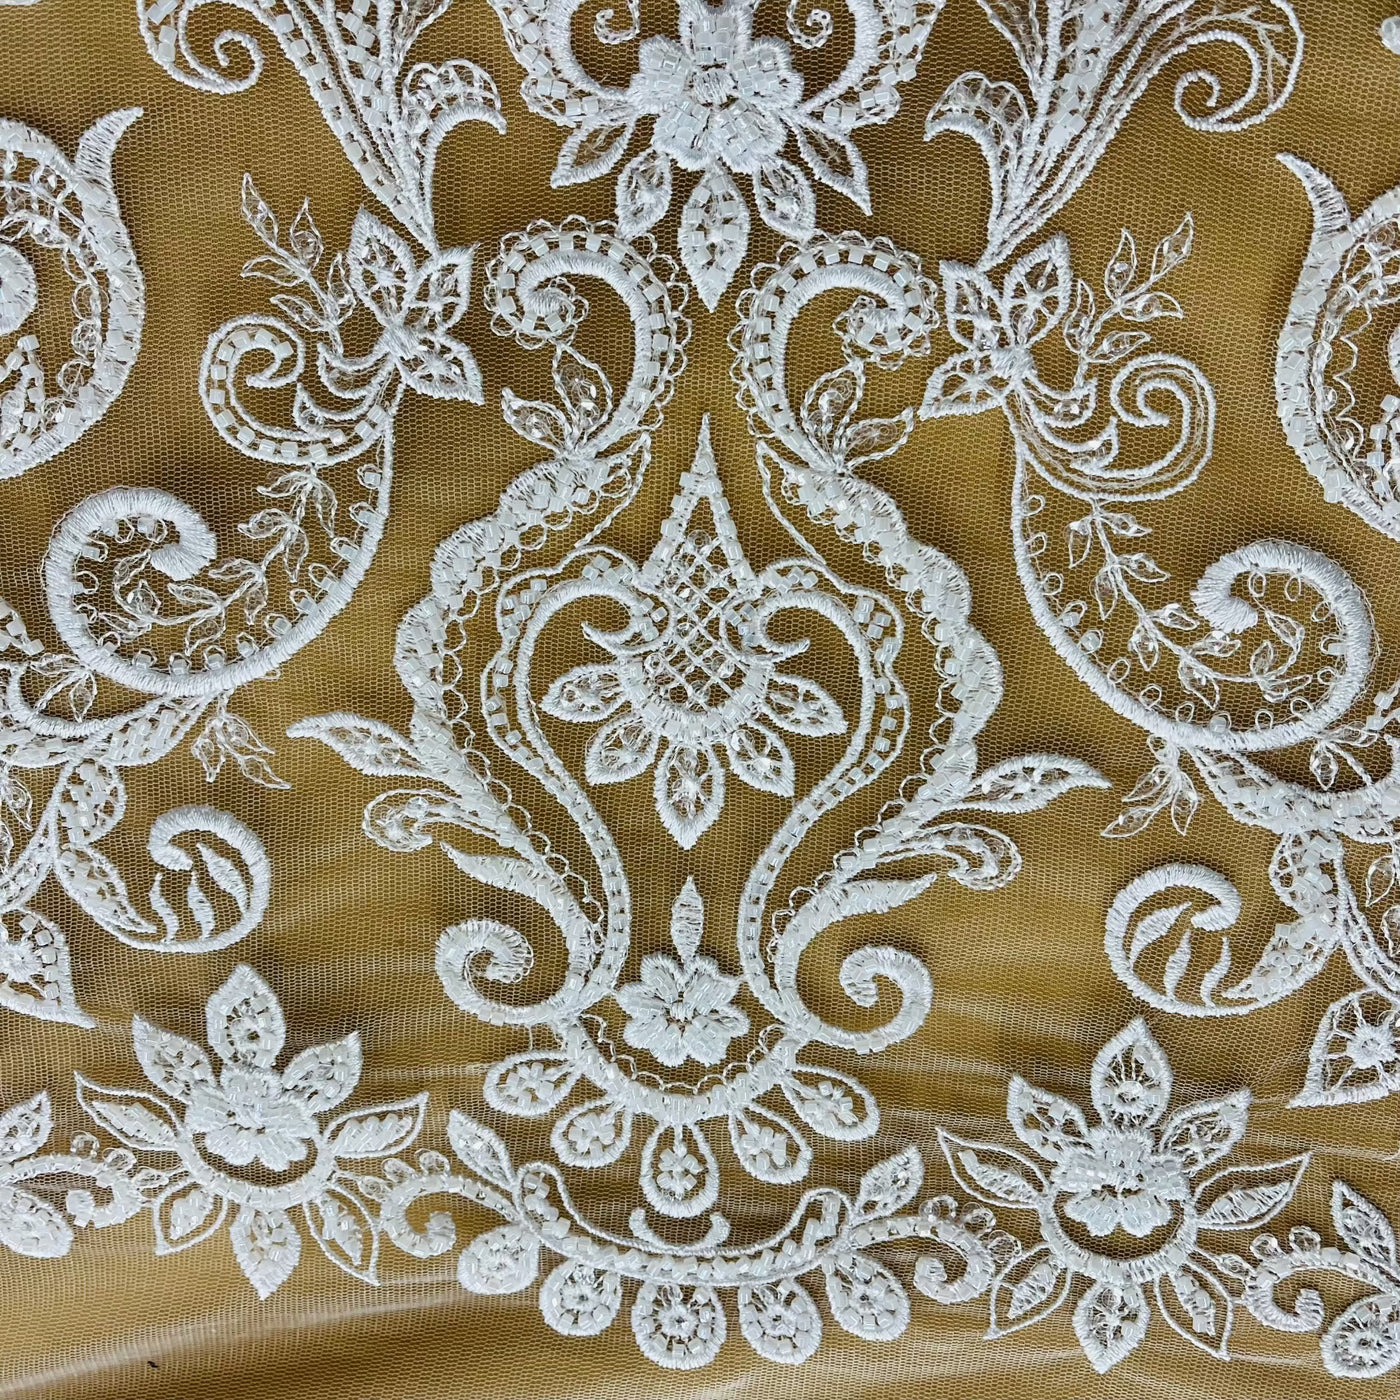 Beaded & Sequined Lace Fabric Embroidered on 100% Polyester Net Mesh | Lace USA - GD-12156 White